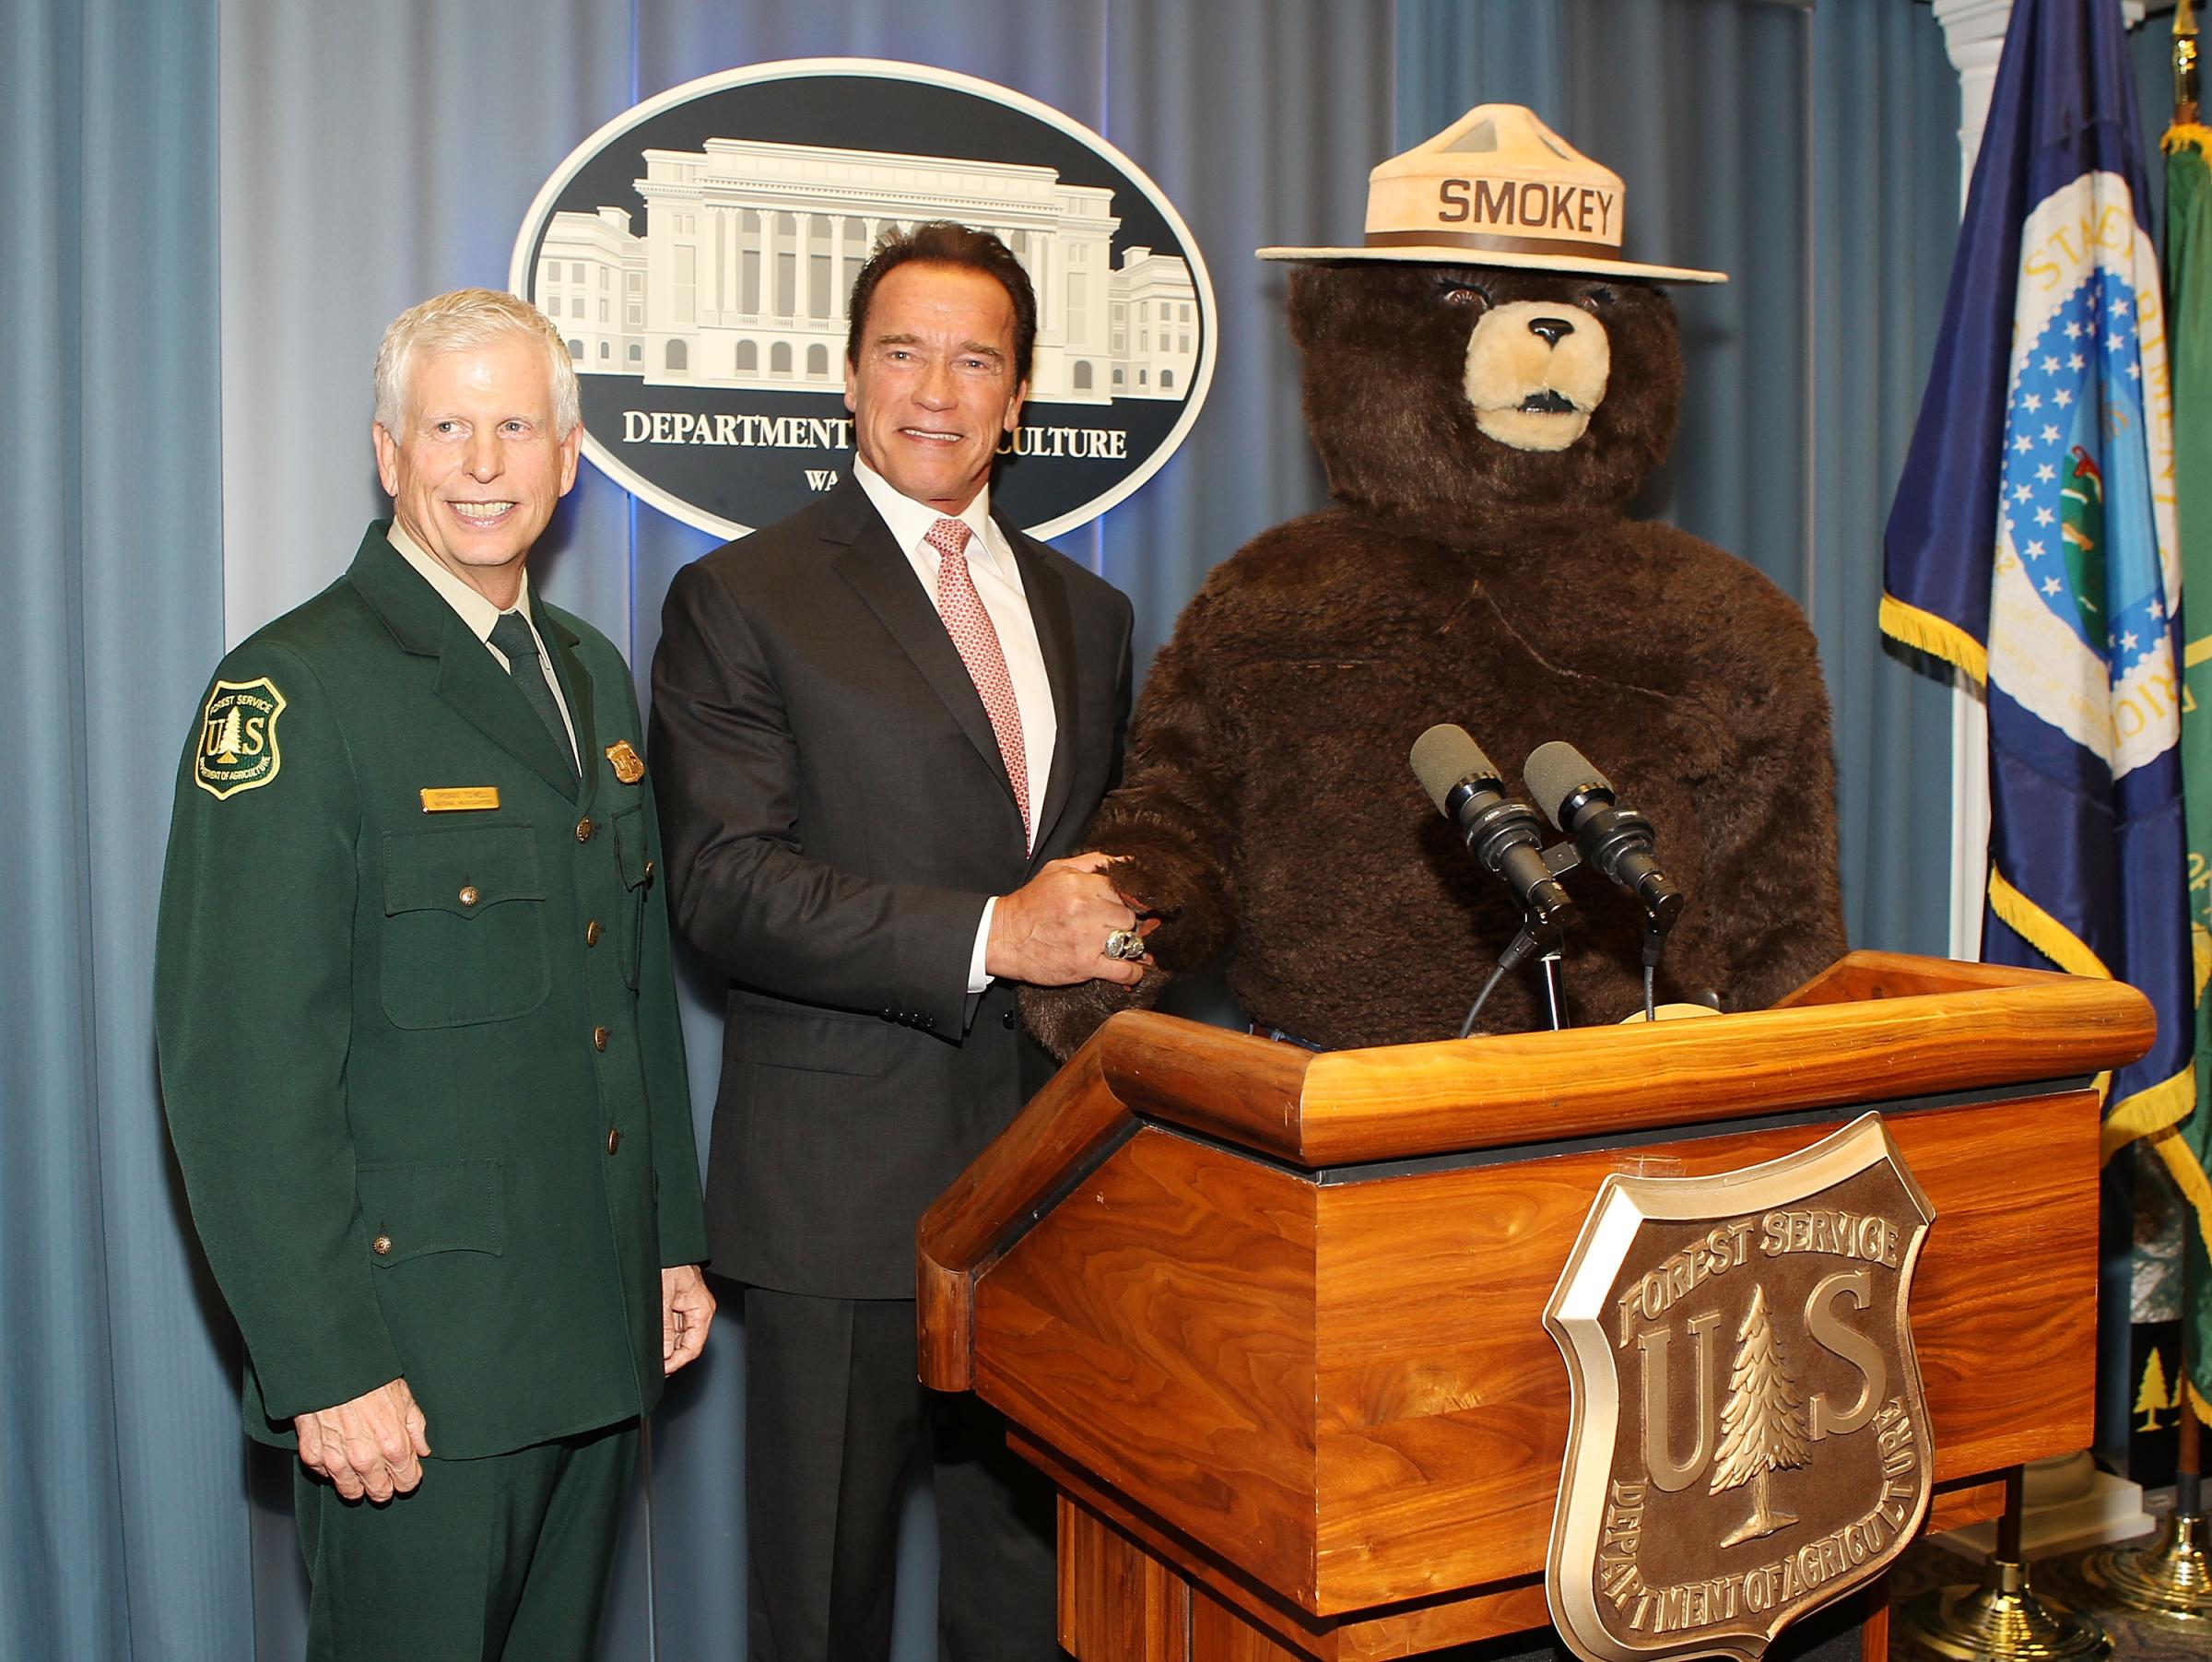 U.S. Forest Services Celebrates Honorary Forest Ranger Arnold Schwarzenegger During Ceremony